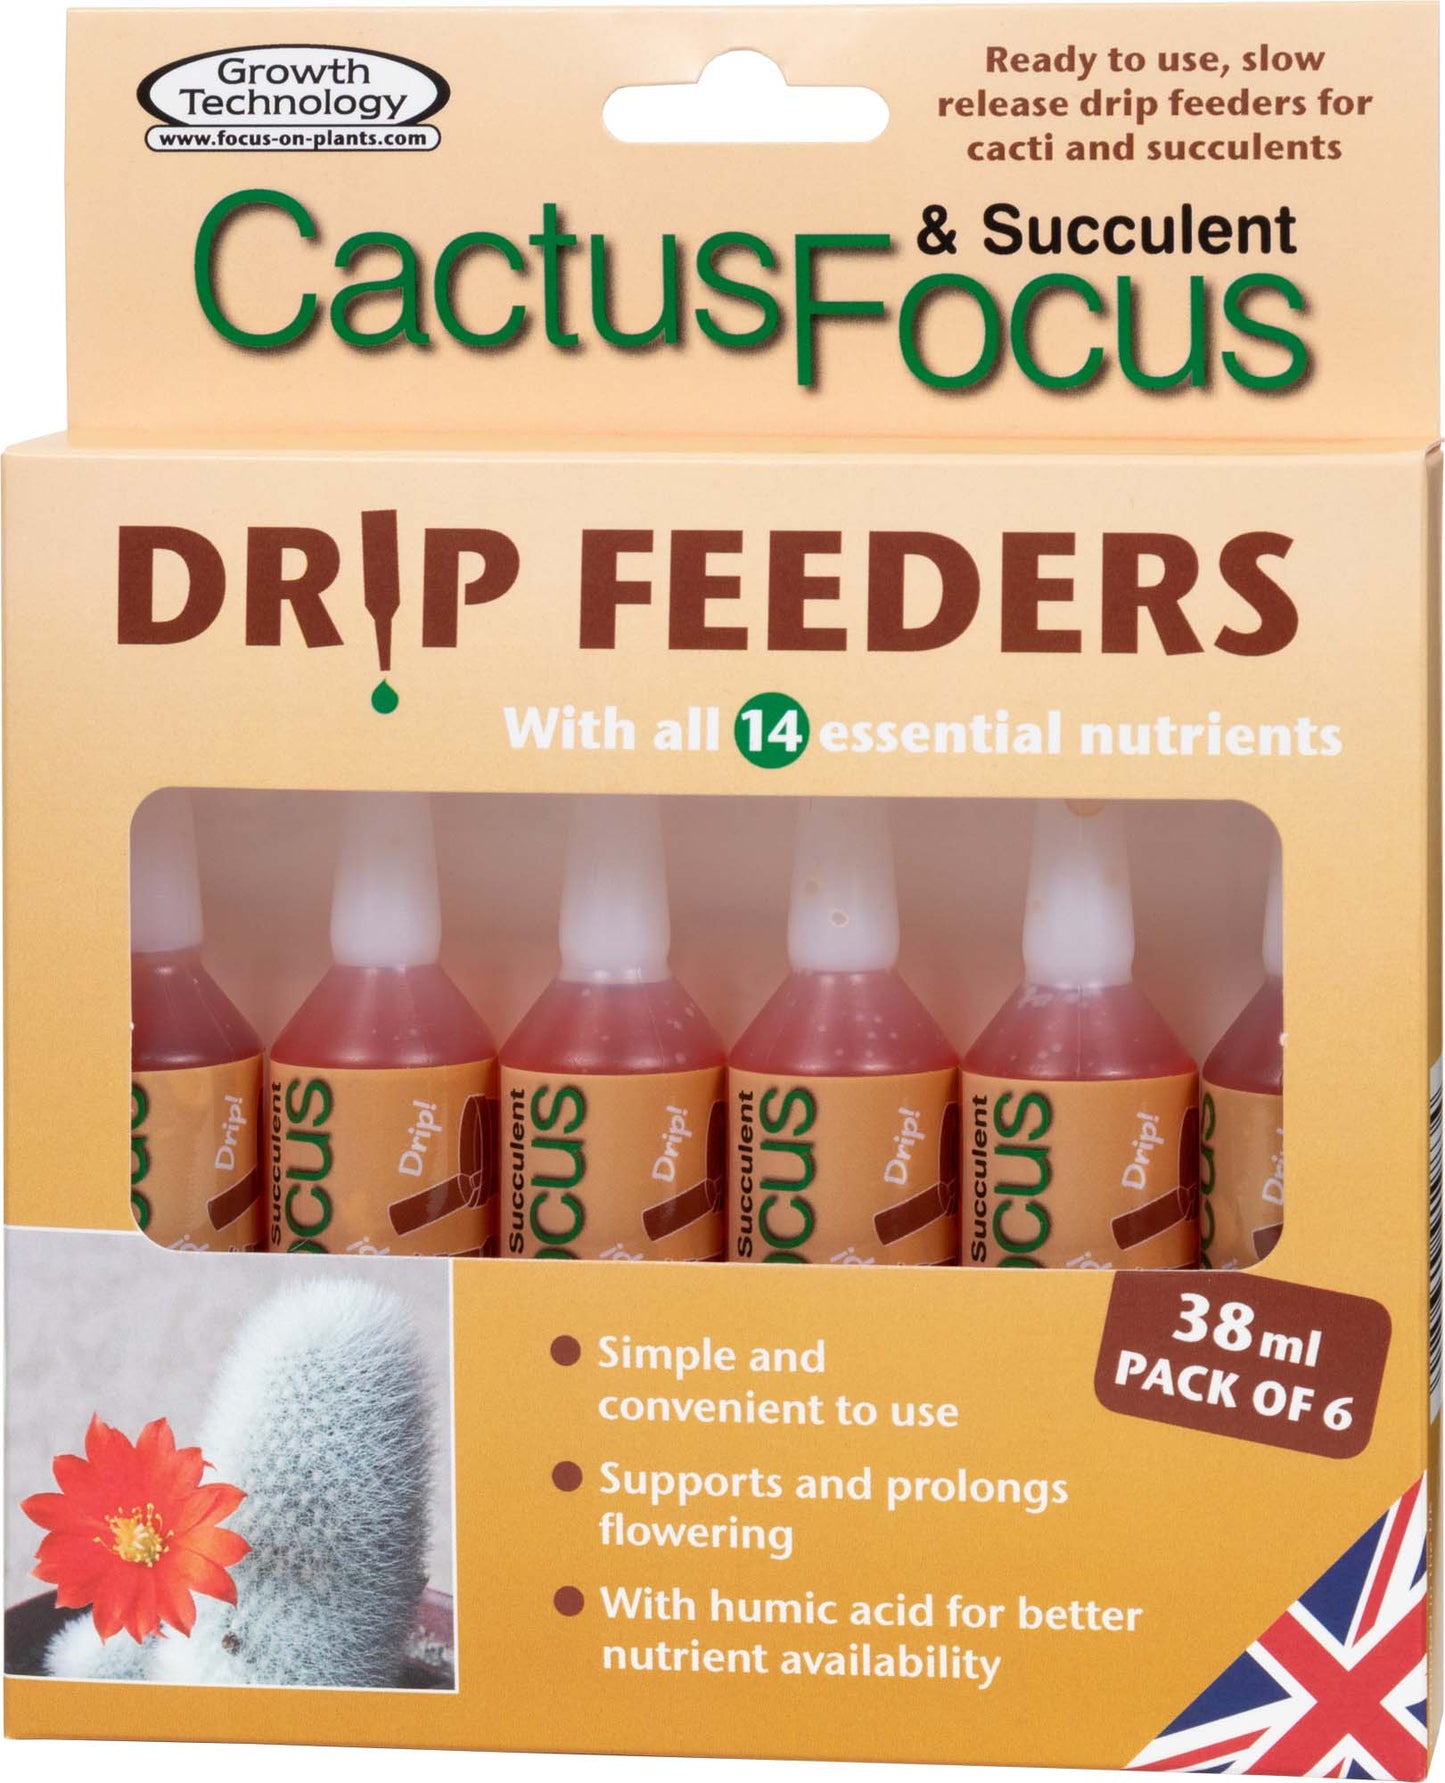 Cactus and Succulent Drip Feeders (Pack of 6)